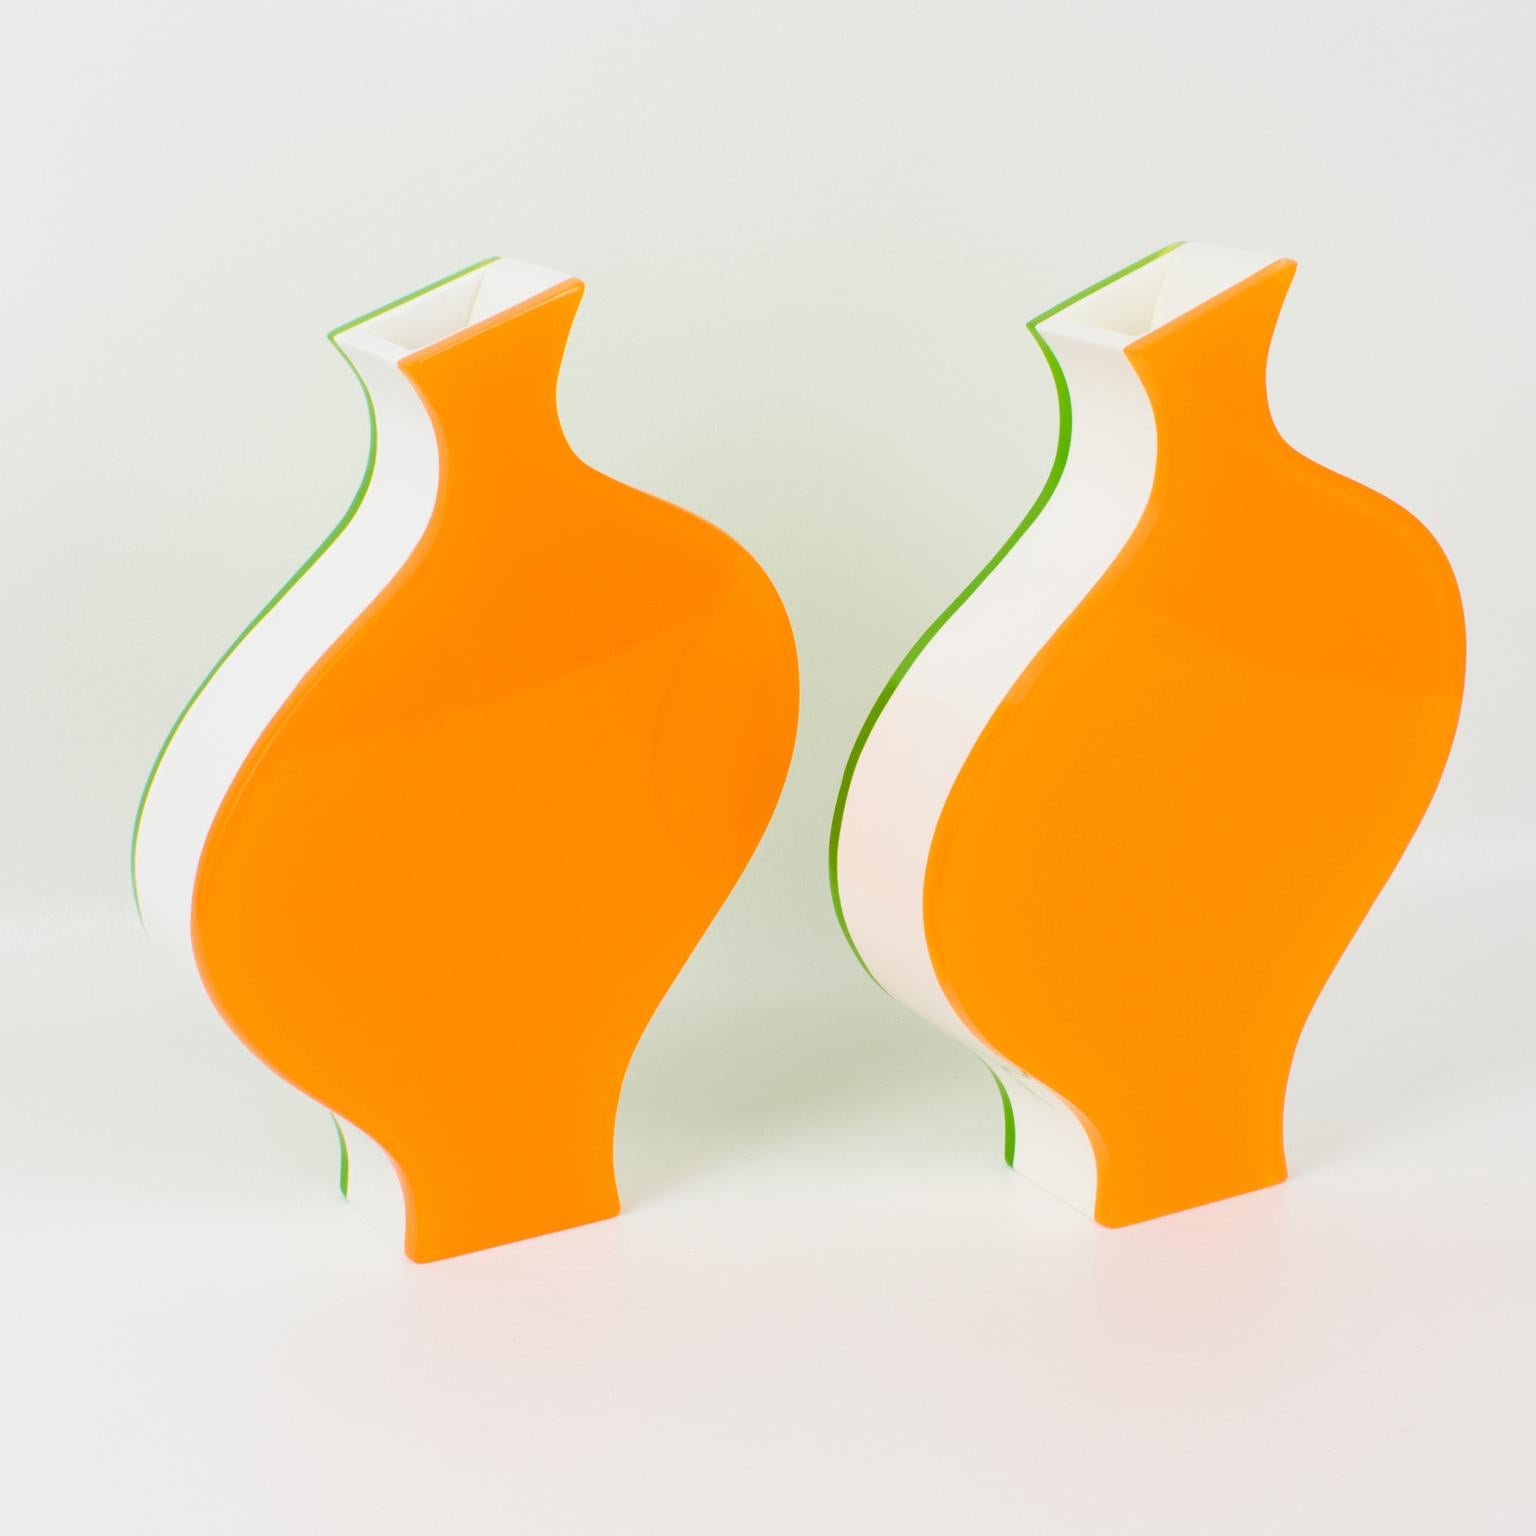 Late 20th Century Villeroy & Boch Orange and Green Plexiglass or Lucite Vases, 1990s